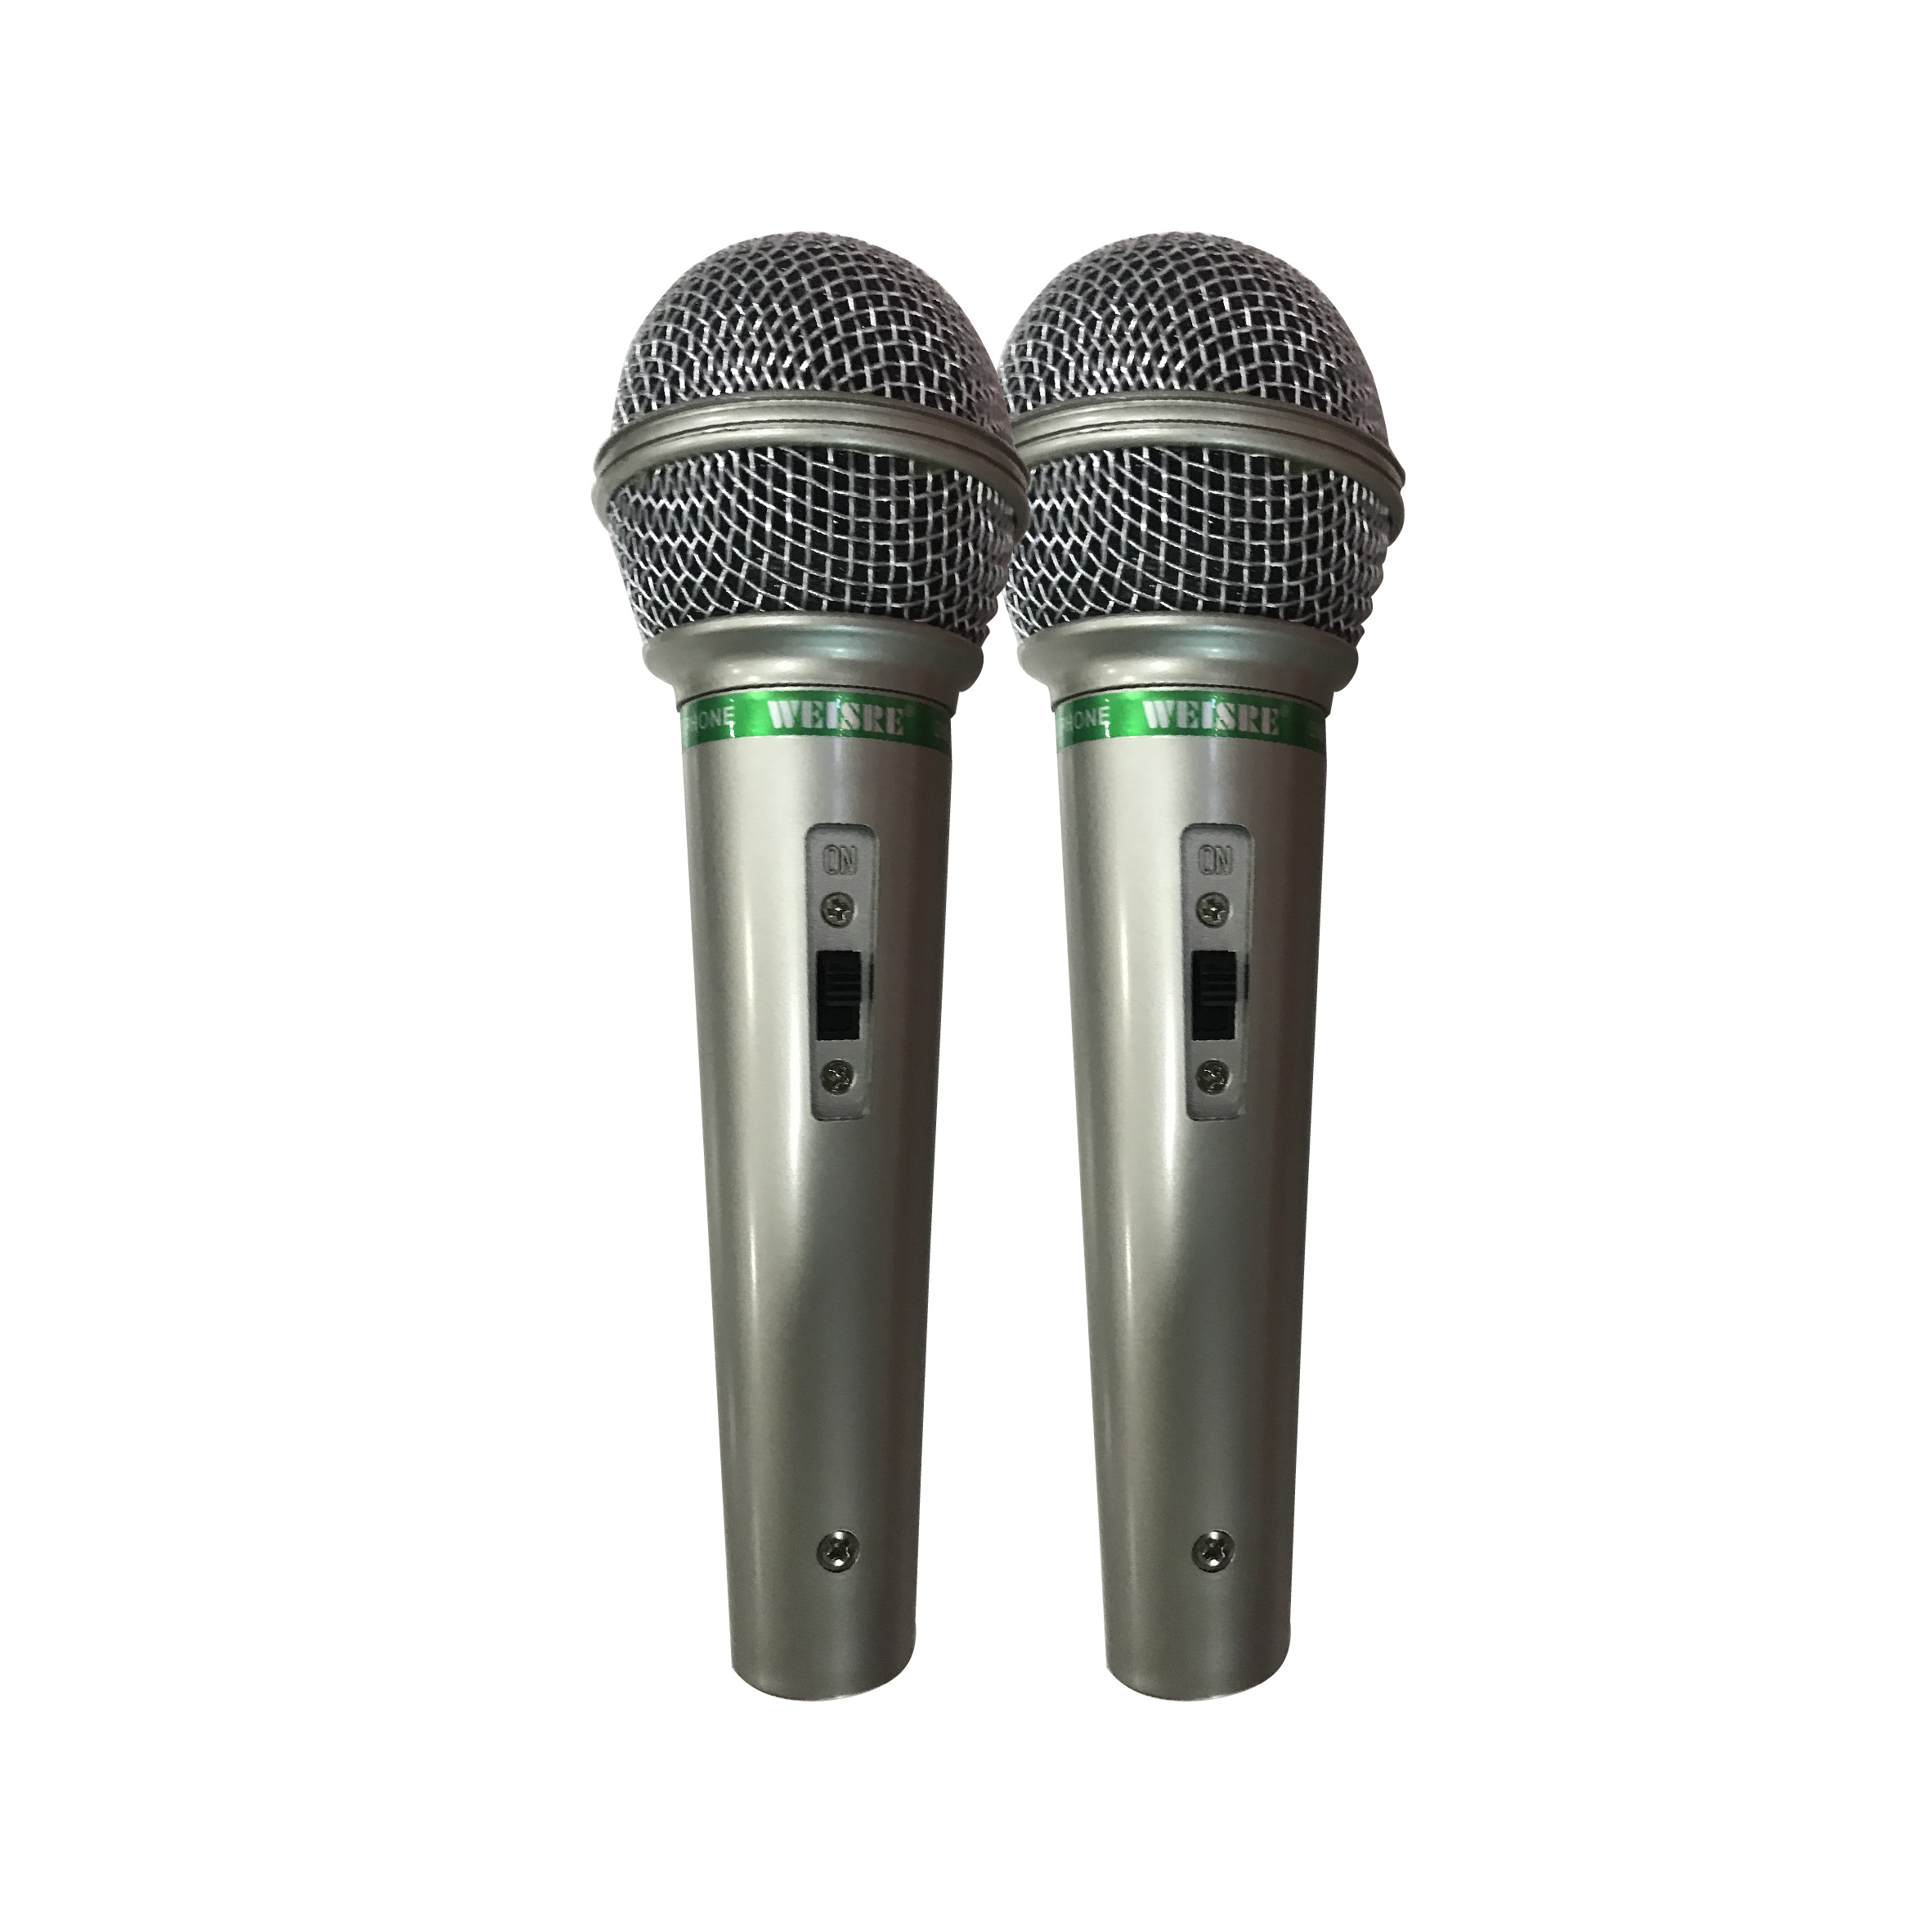 Weisre Professional 2 Microphone Silver, 2MIC